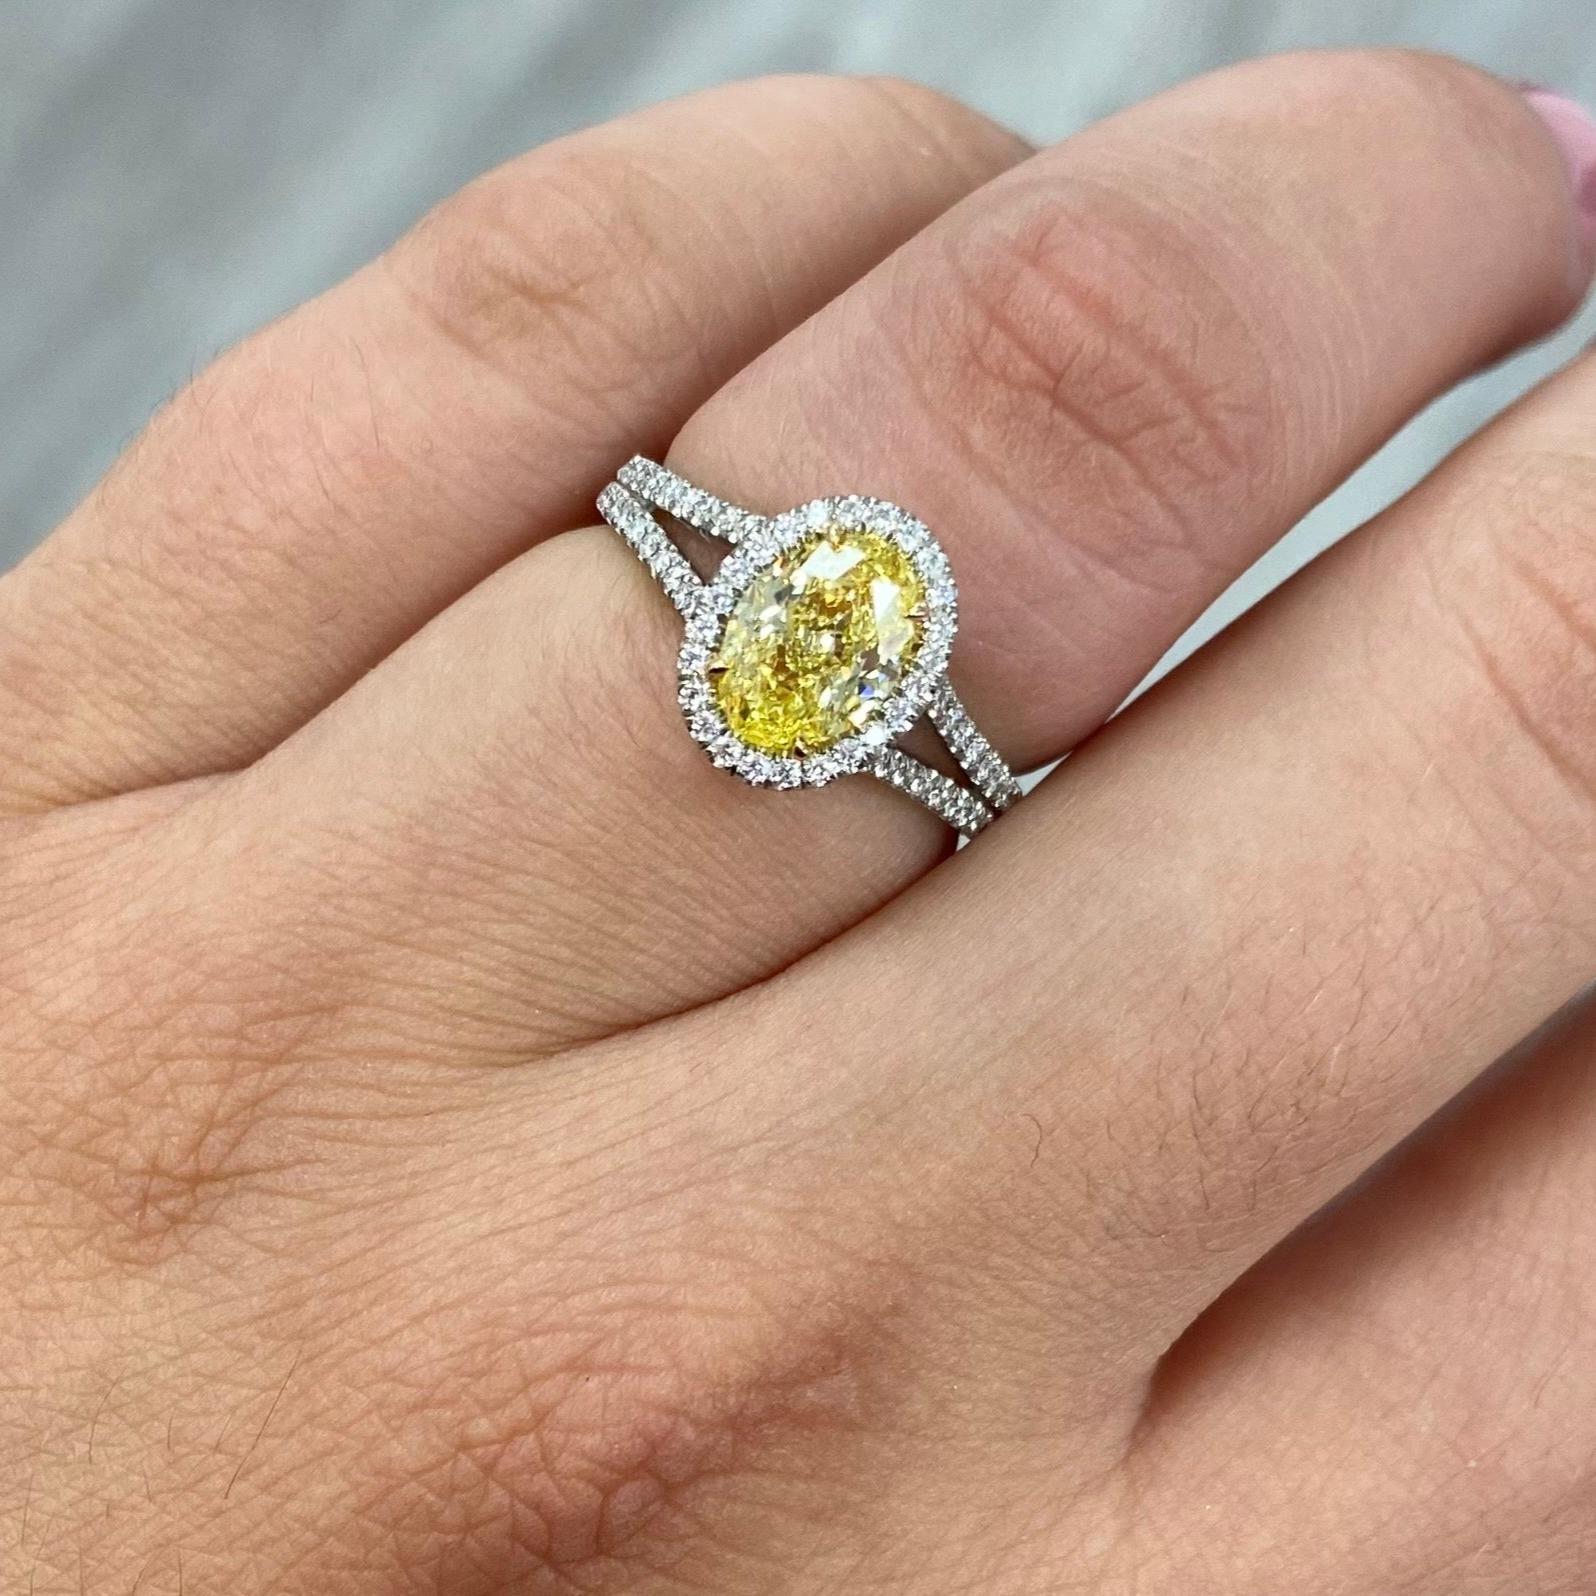 Elegant ring with a strong Fancy Intense Yellow Oval in a gorgeous split shank halo design
1.47 Carat GIA Fancy Intense Yellow Oval 
SI1 Clarity 
Designed with a micro pave halo & split shank 
Surrounded with 0.36 Carats of White Diamonds
Handmade